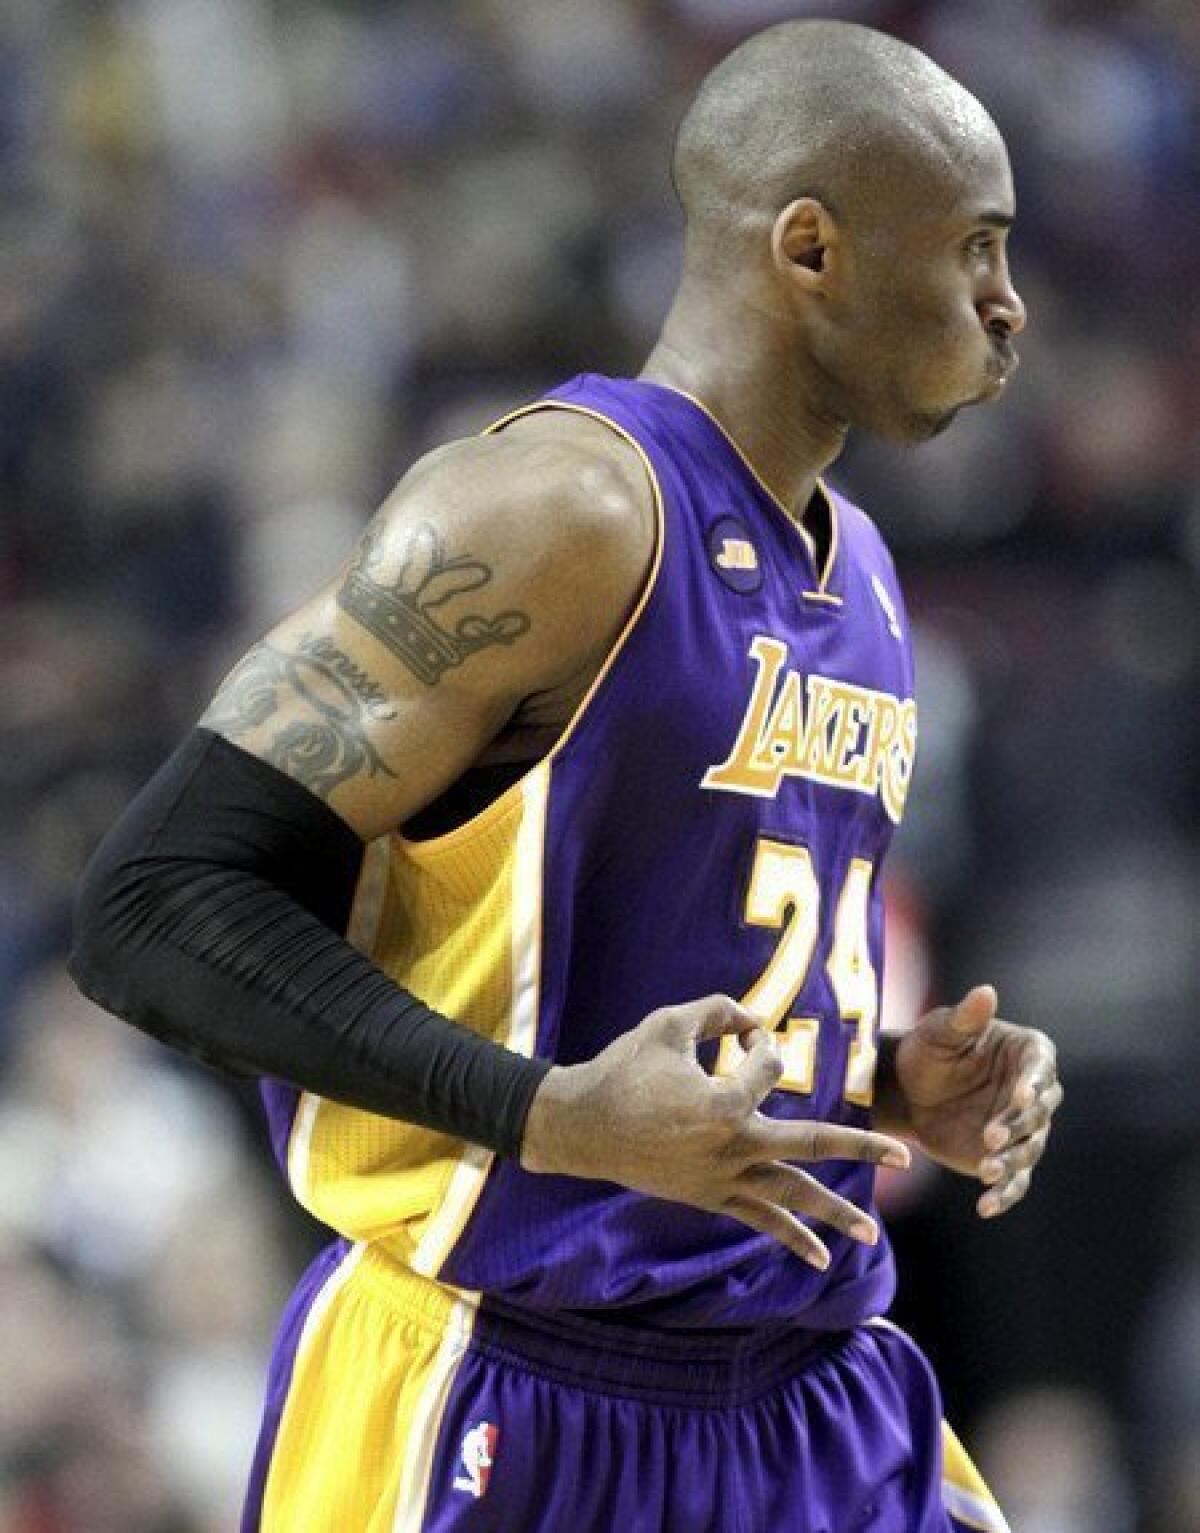 Lakers guard Kobe Bryant, shown last season against the Portland Trail Blazers, continues to work on his recovery from an Achilles' tendon injury.